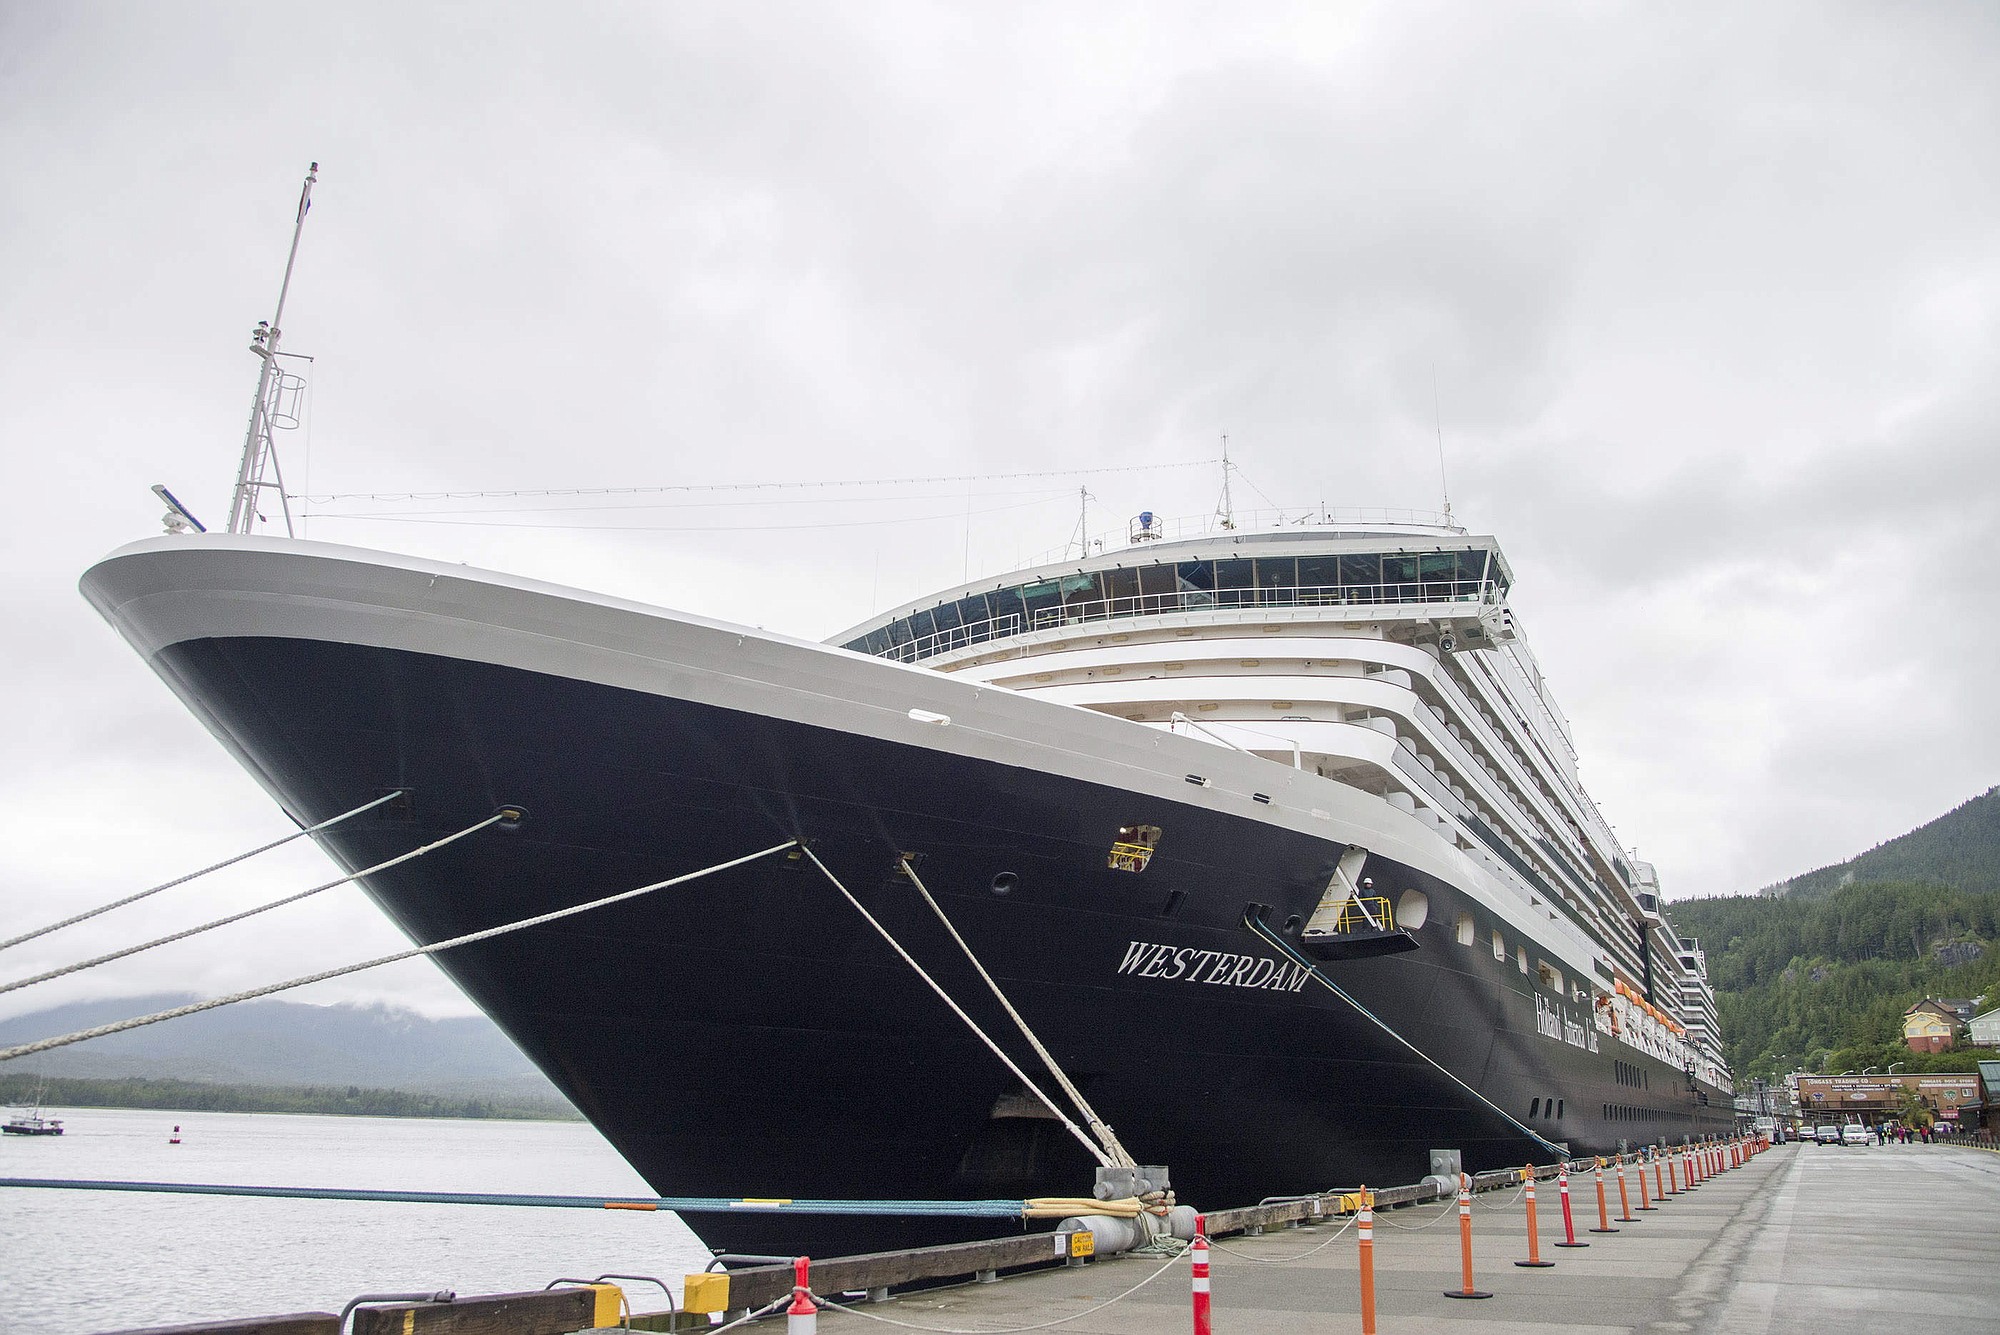 The Holland America Line cruise ship Westerdam sits in dock in Ketchikan, Alaska, on Thursday.